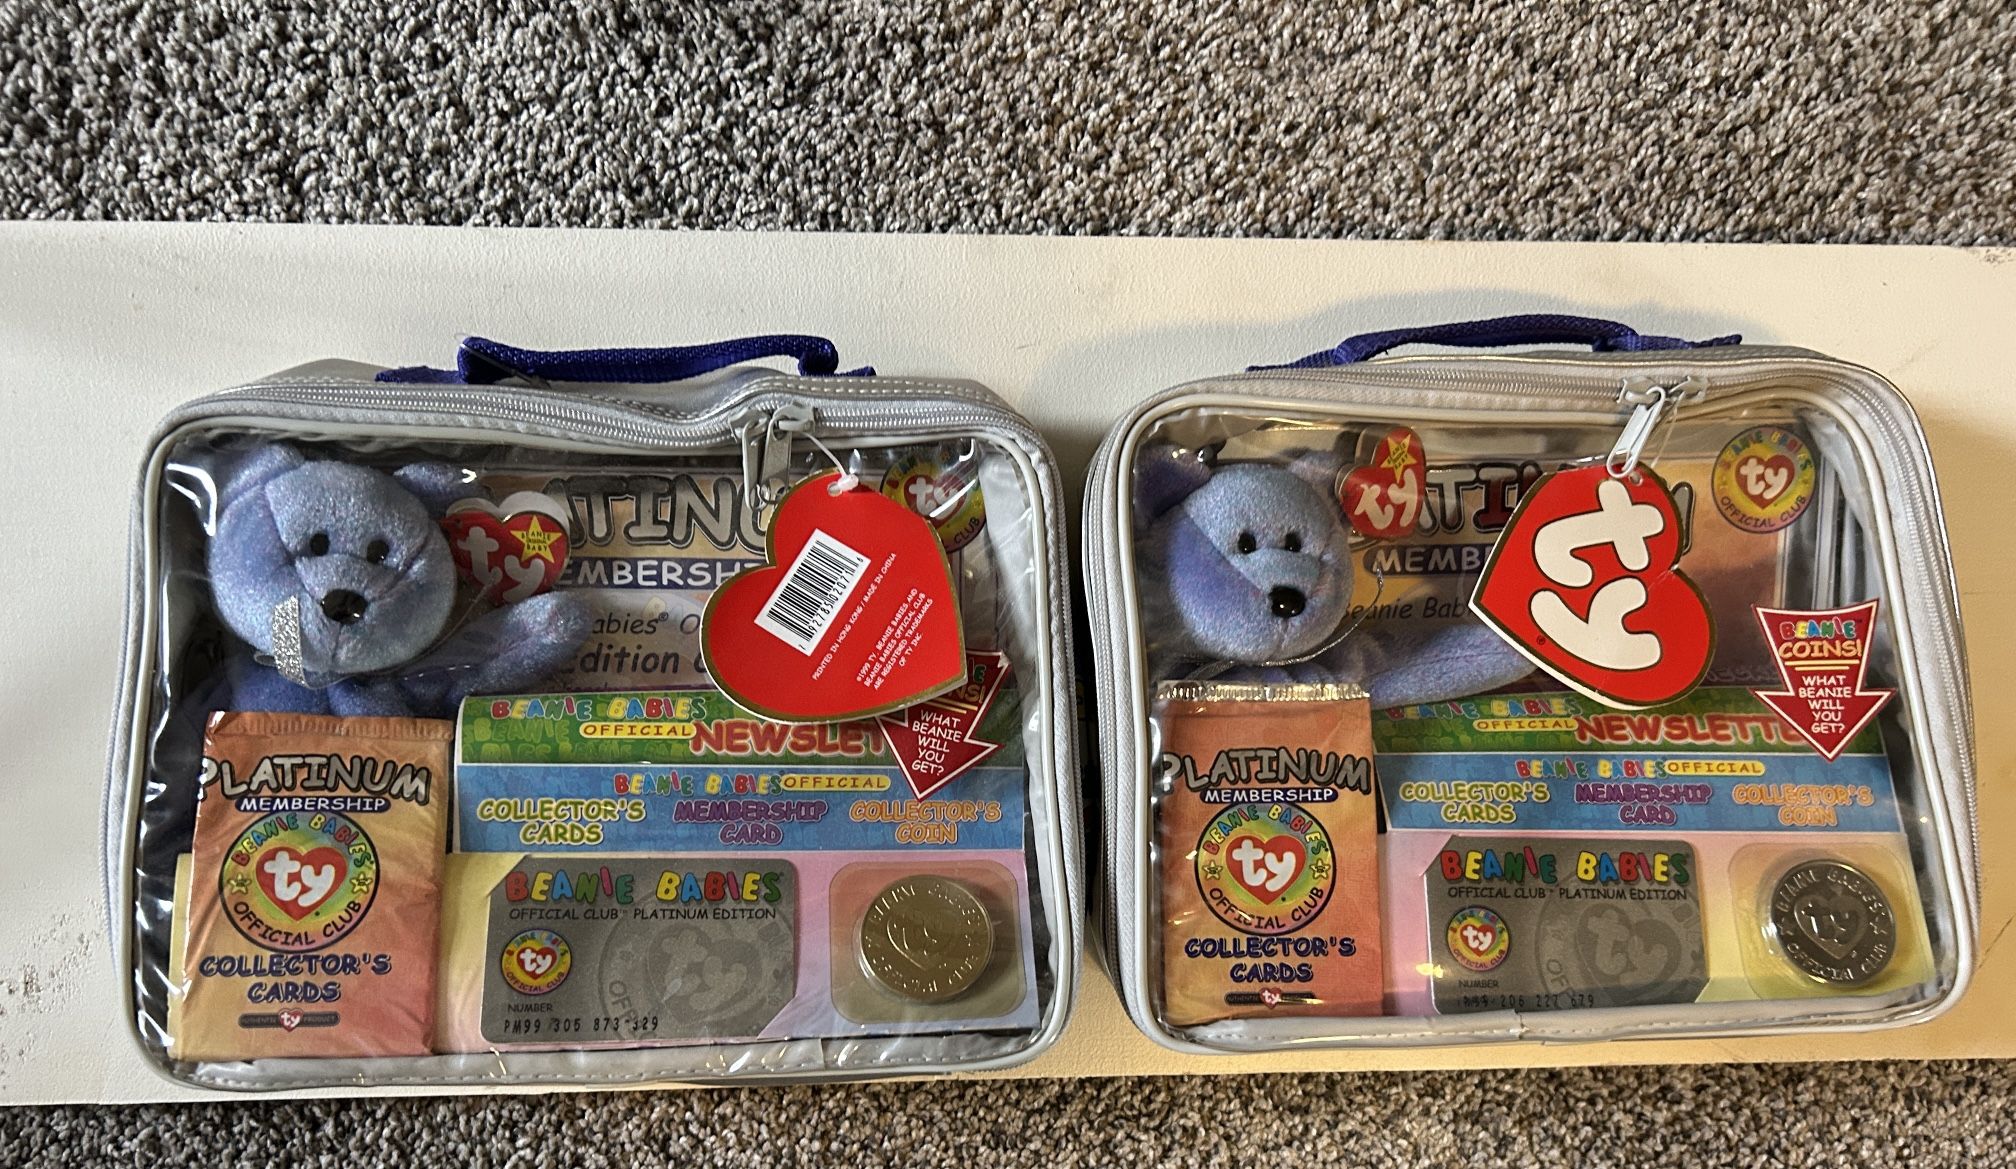 $20 Each Collectible Firm Beanie Baby Collection